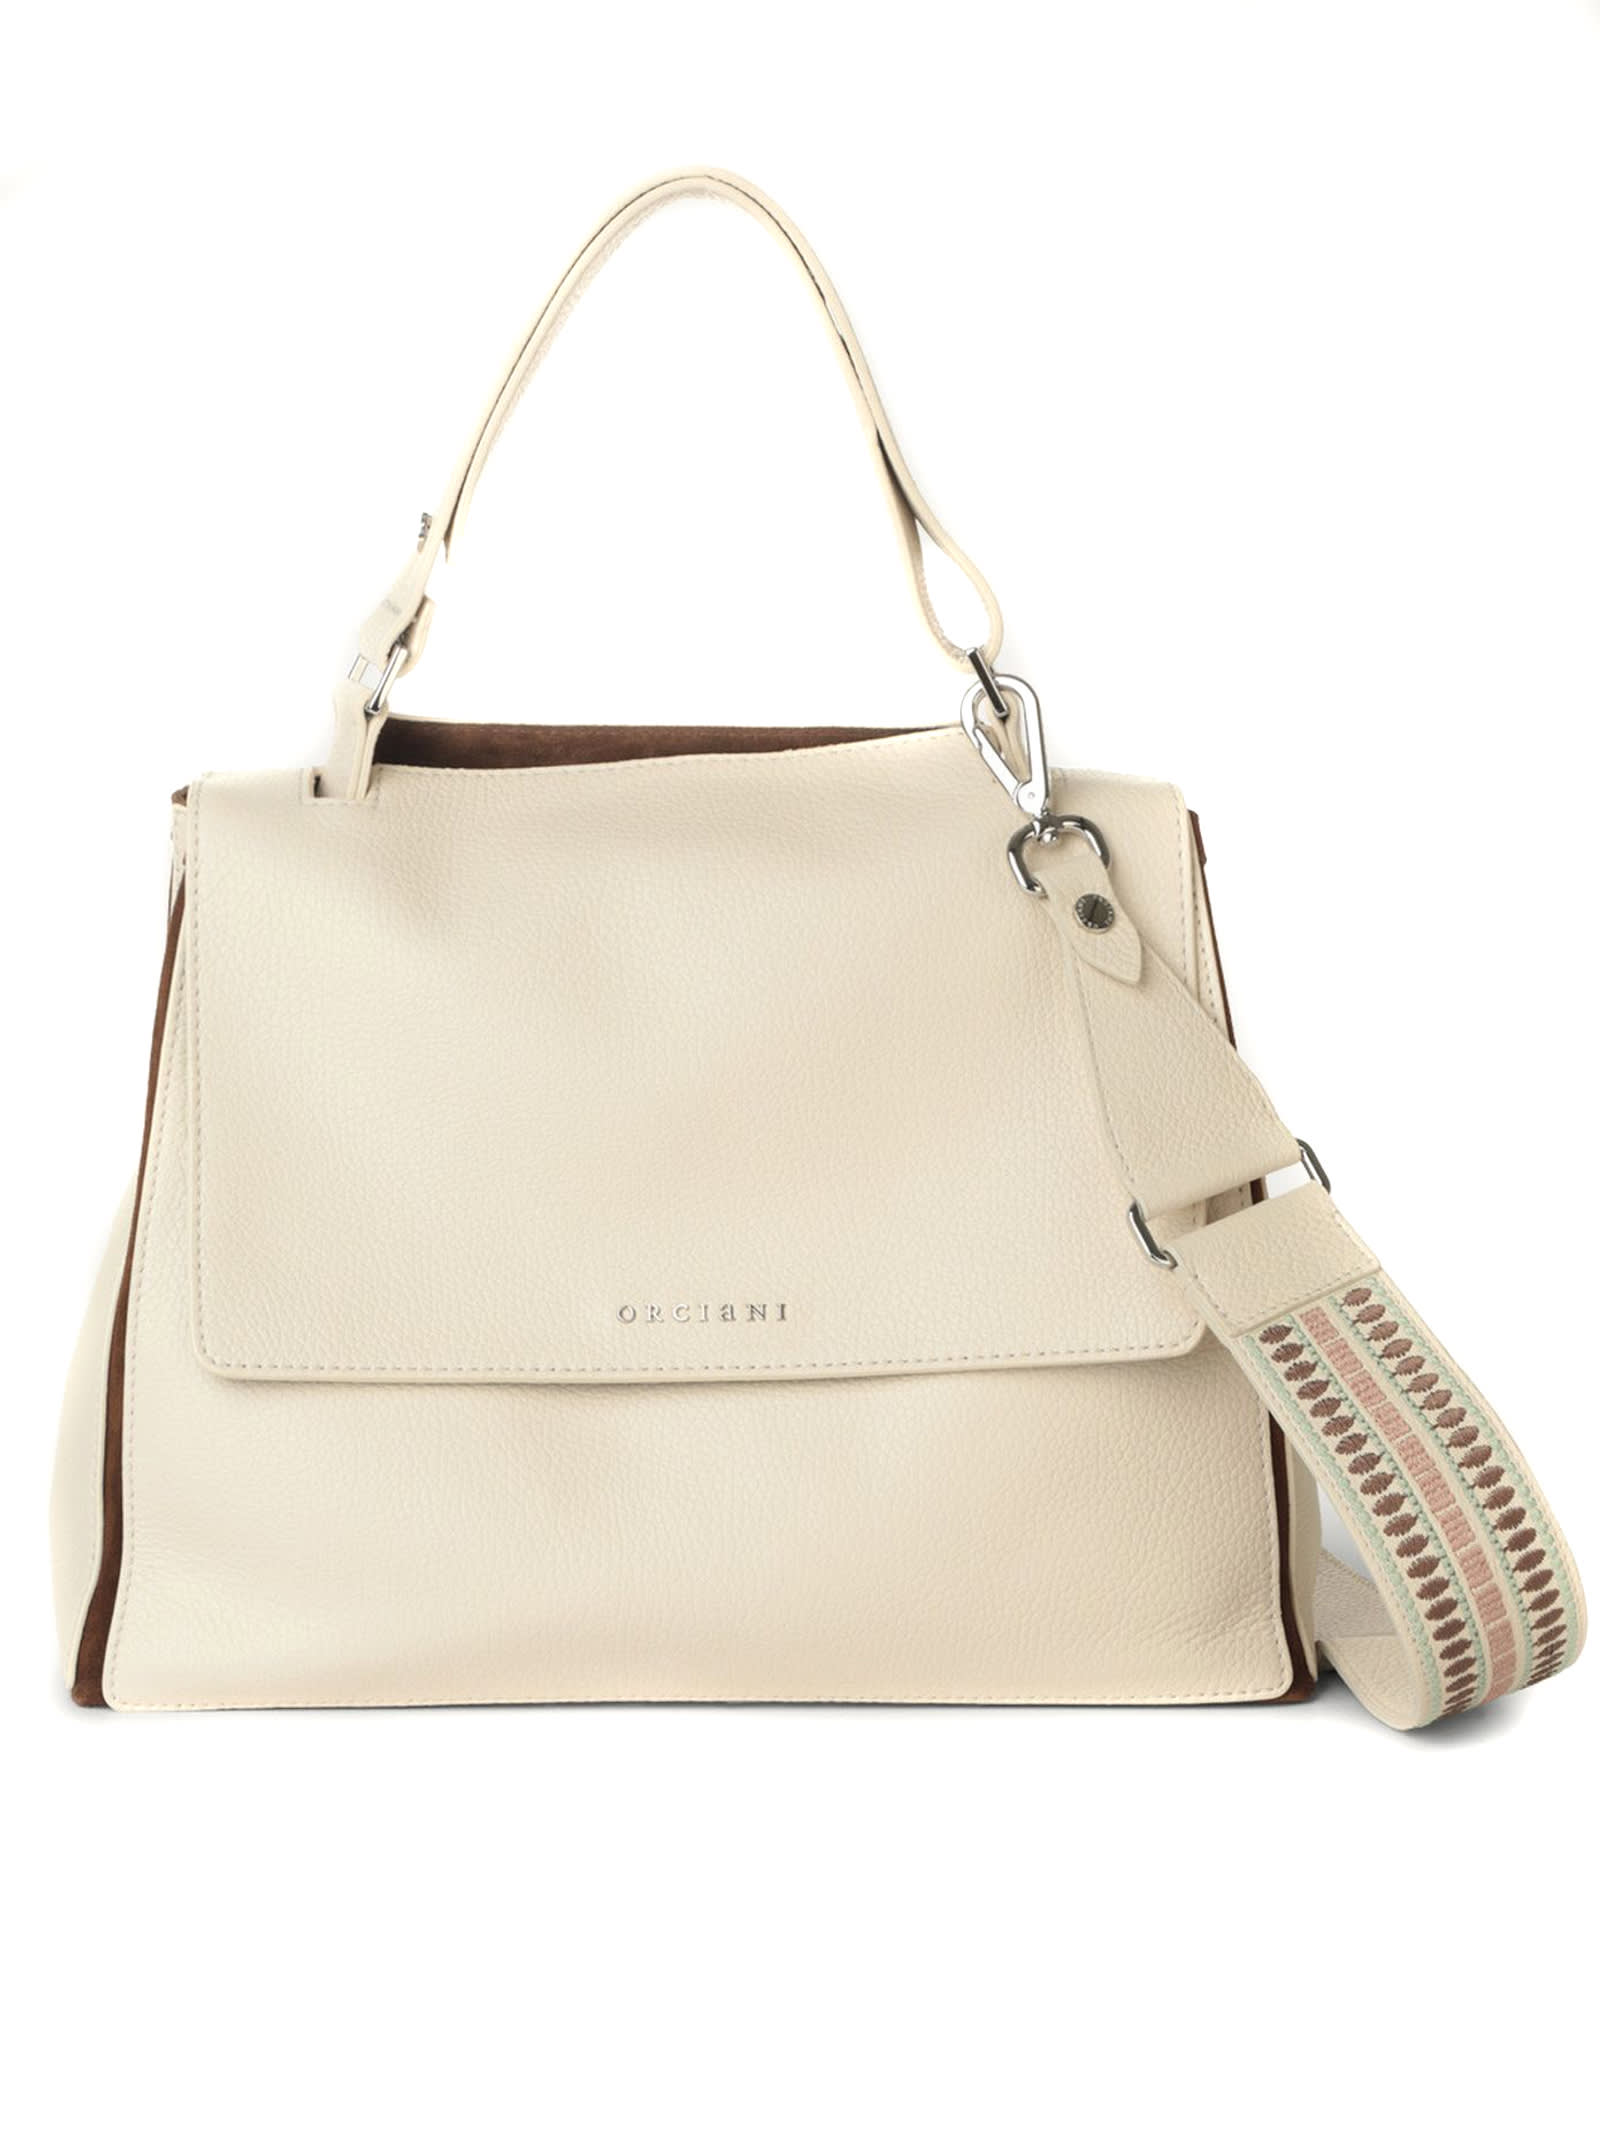 Orciani Cream Grained Leather Shoulder Bag